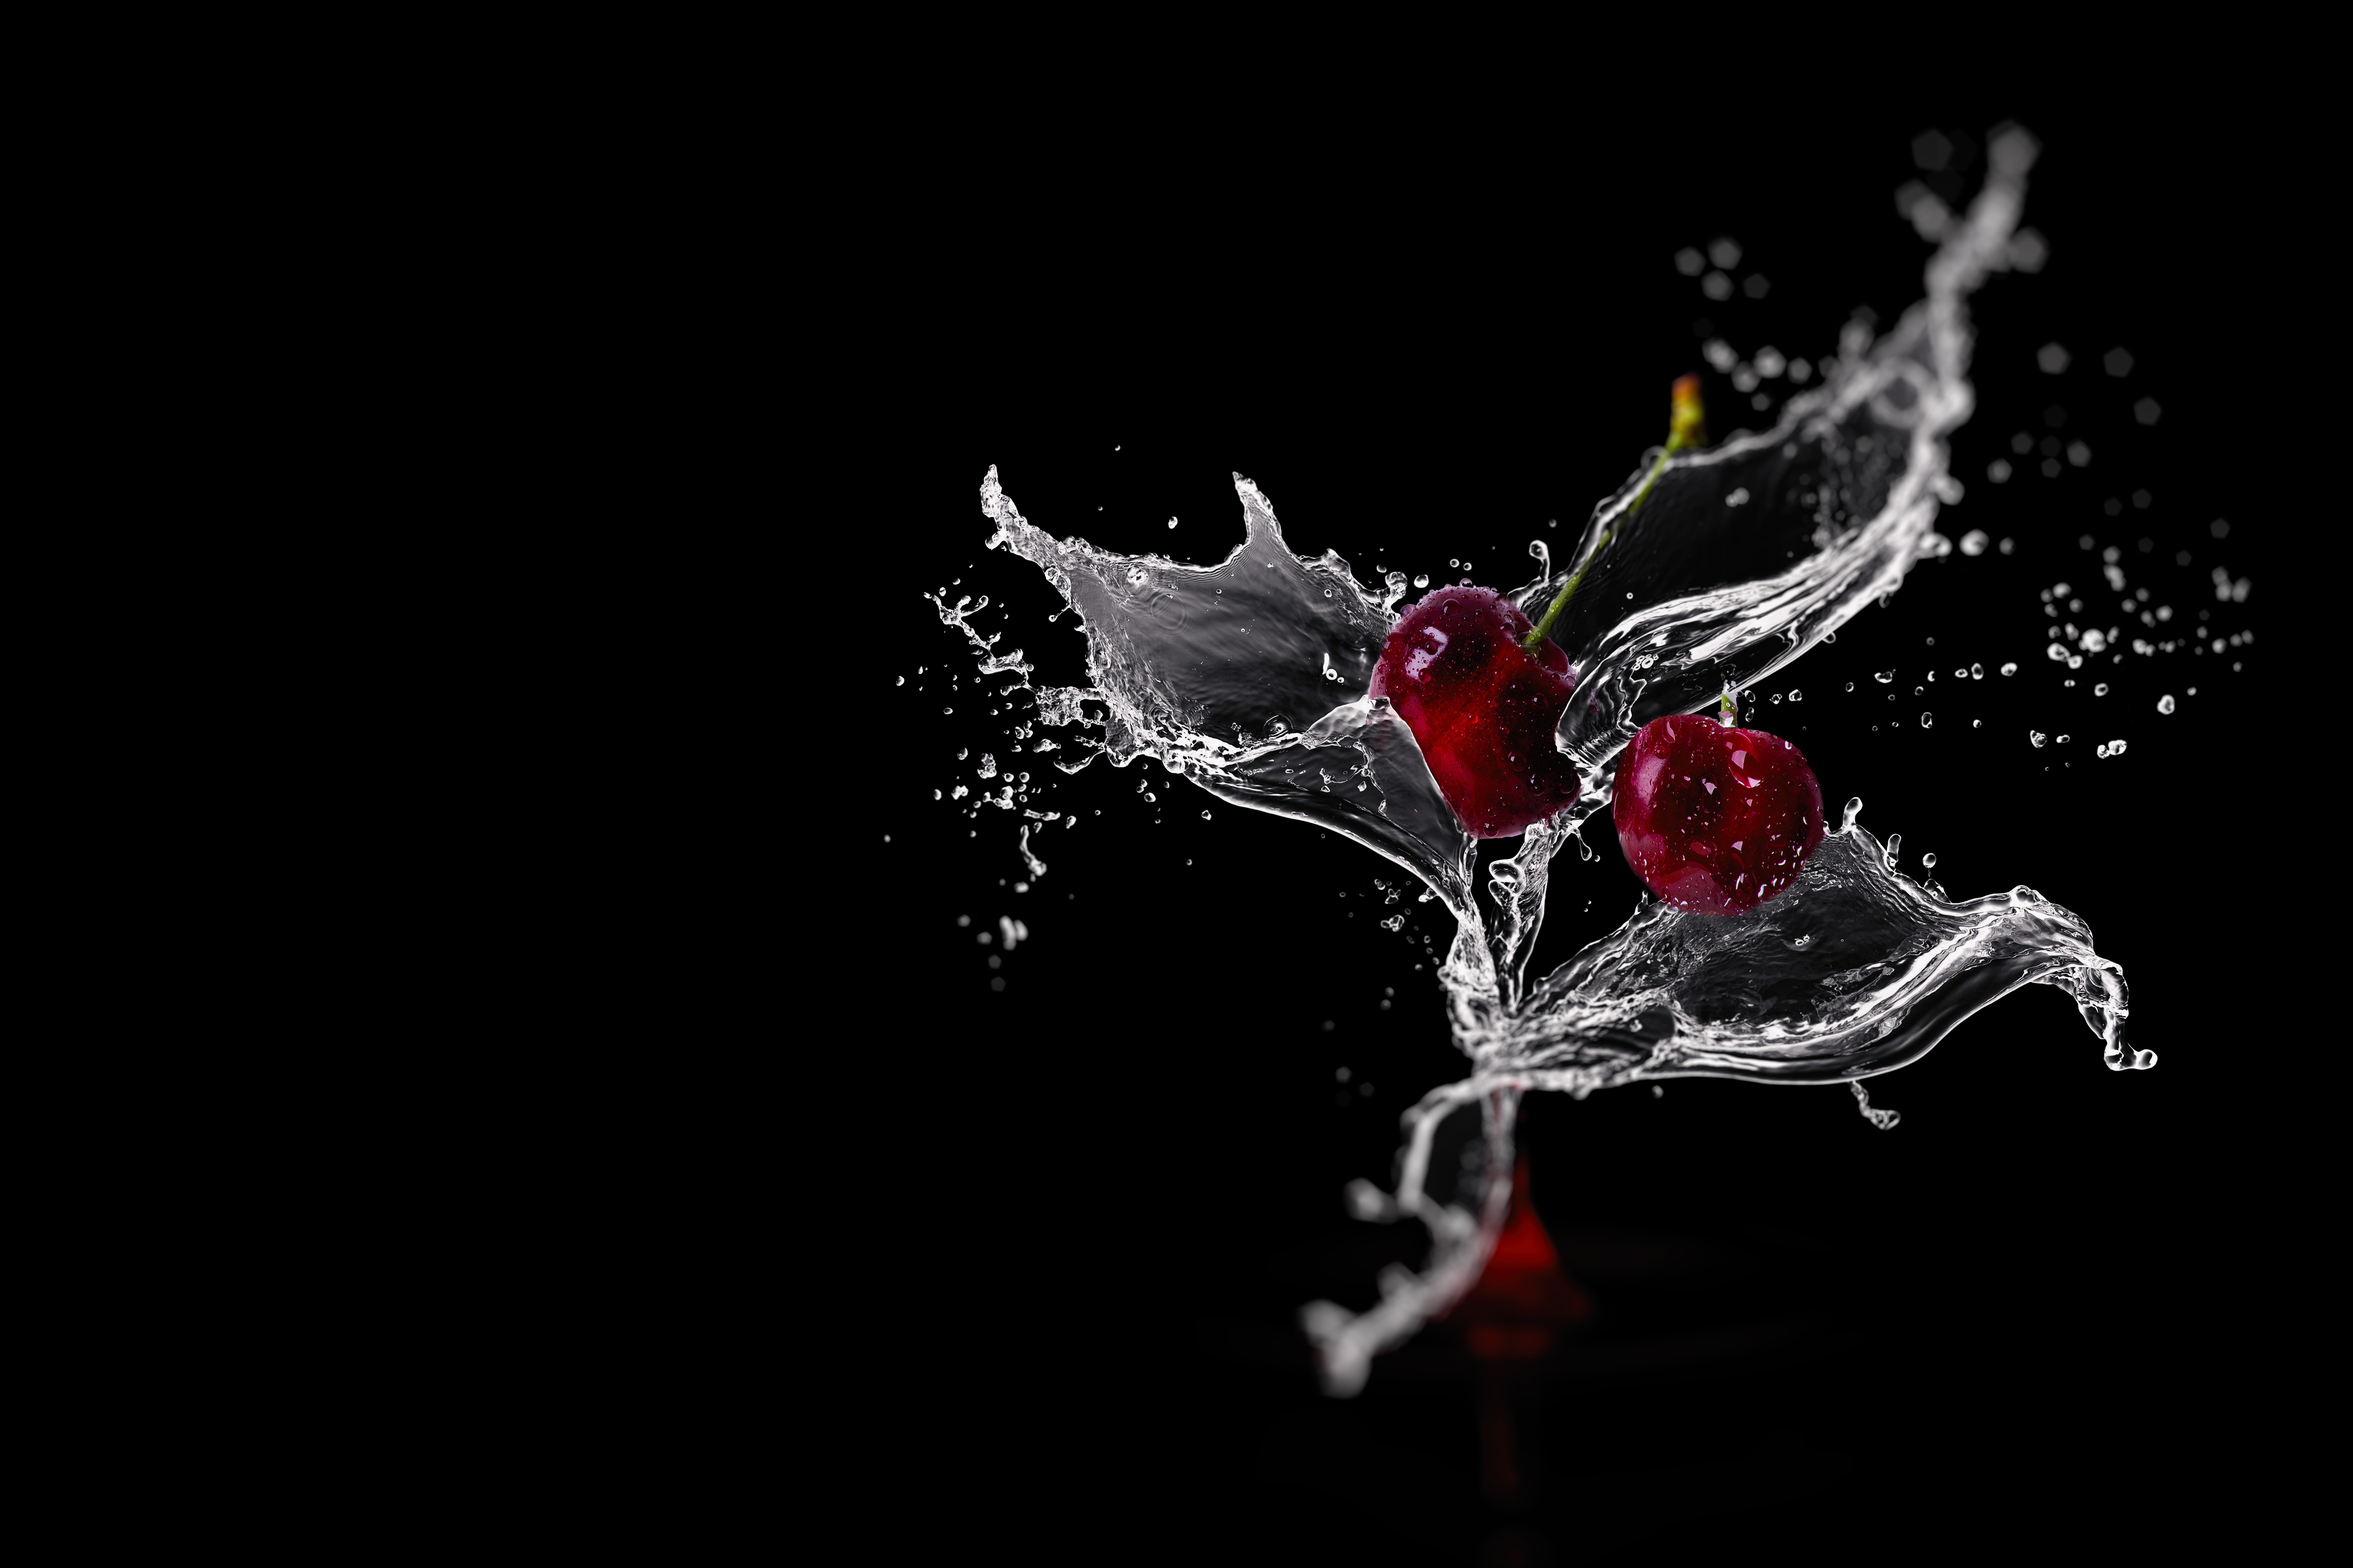 80671 download wallpaper water, food, cherry, spray screensavers and pictures for free